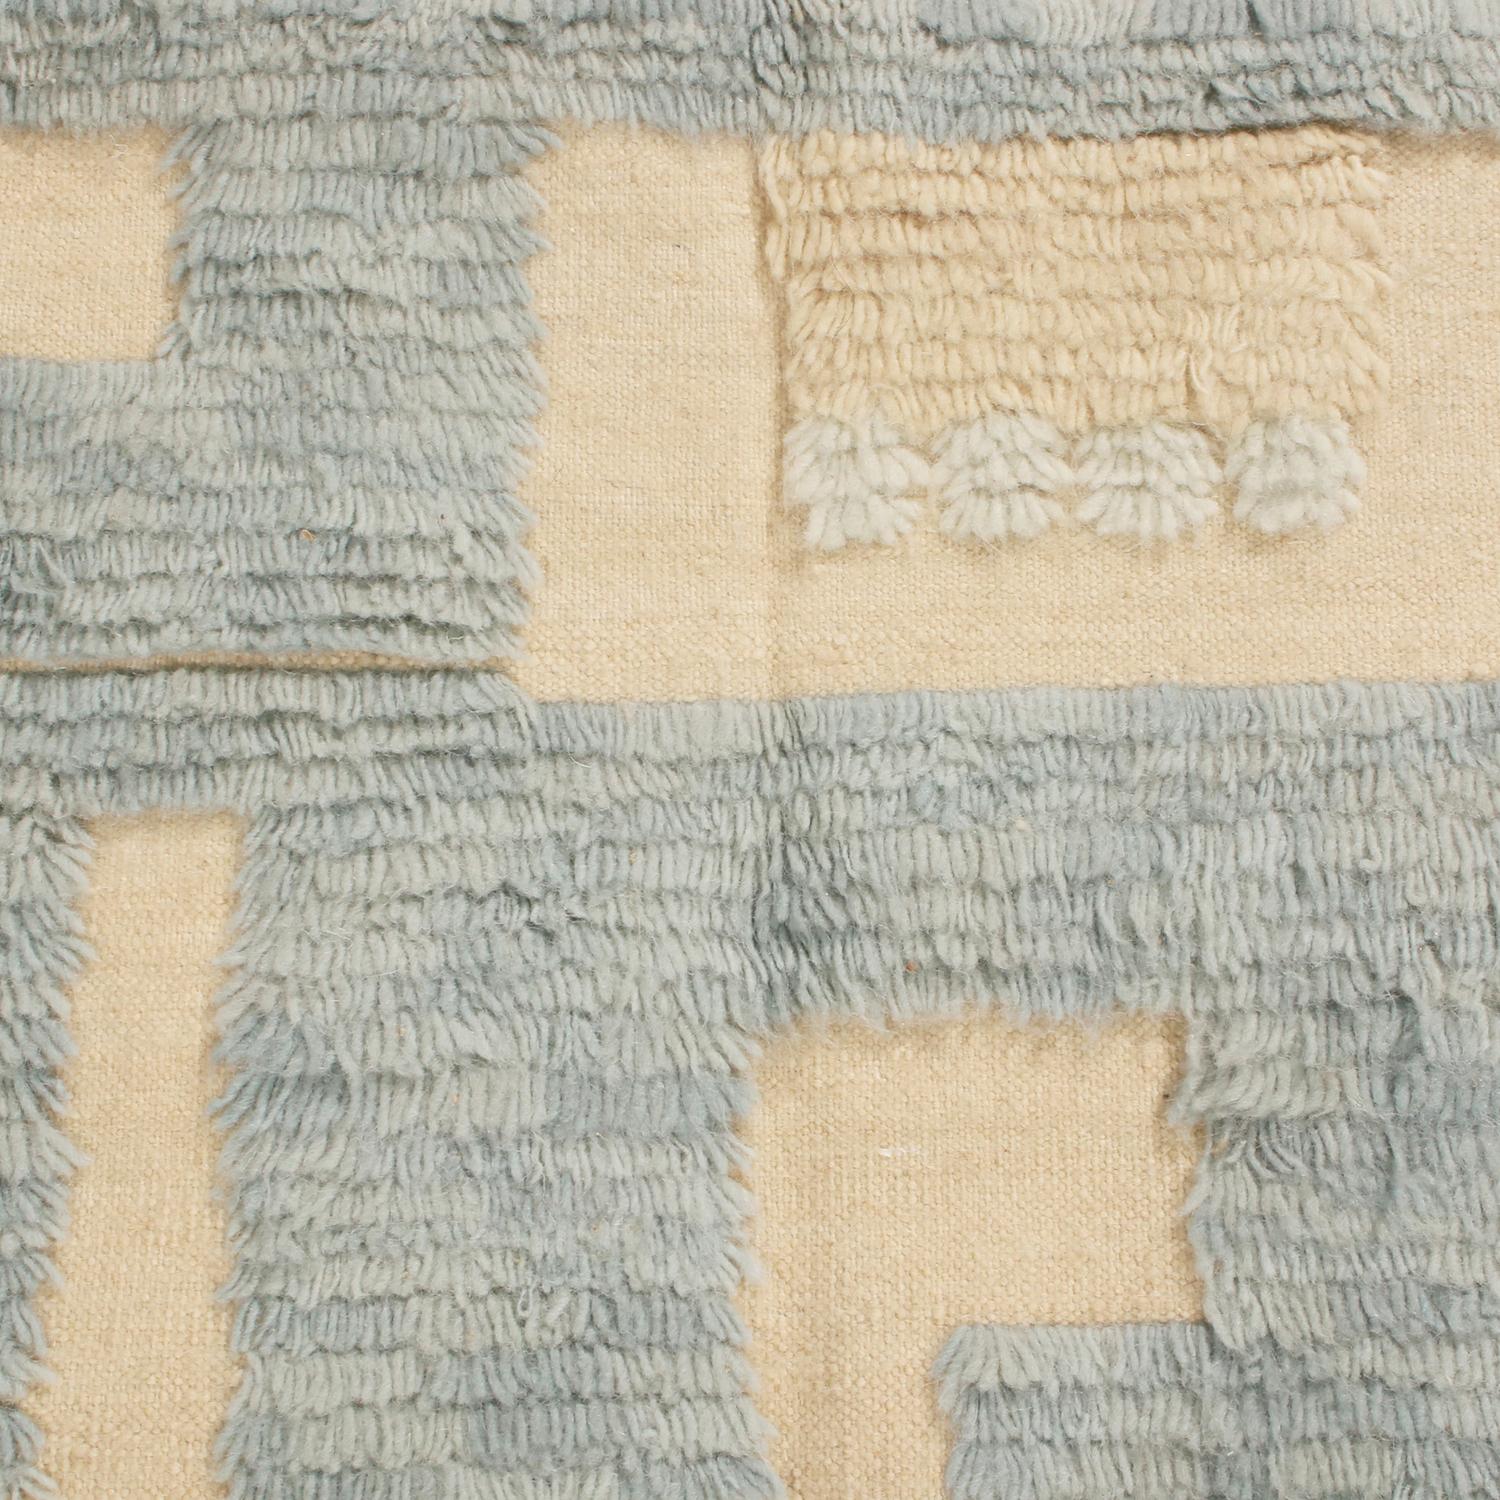 Originating from India, this hand knotted contemporary pile rug hails from Rug & Kilim’s Scandinavian-inspired collection, featuring a distinct tribal and raised pile geometric all-over field design with gentle blue, off-white, gray, and multi-tonal